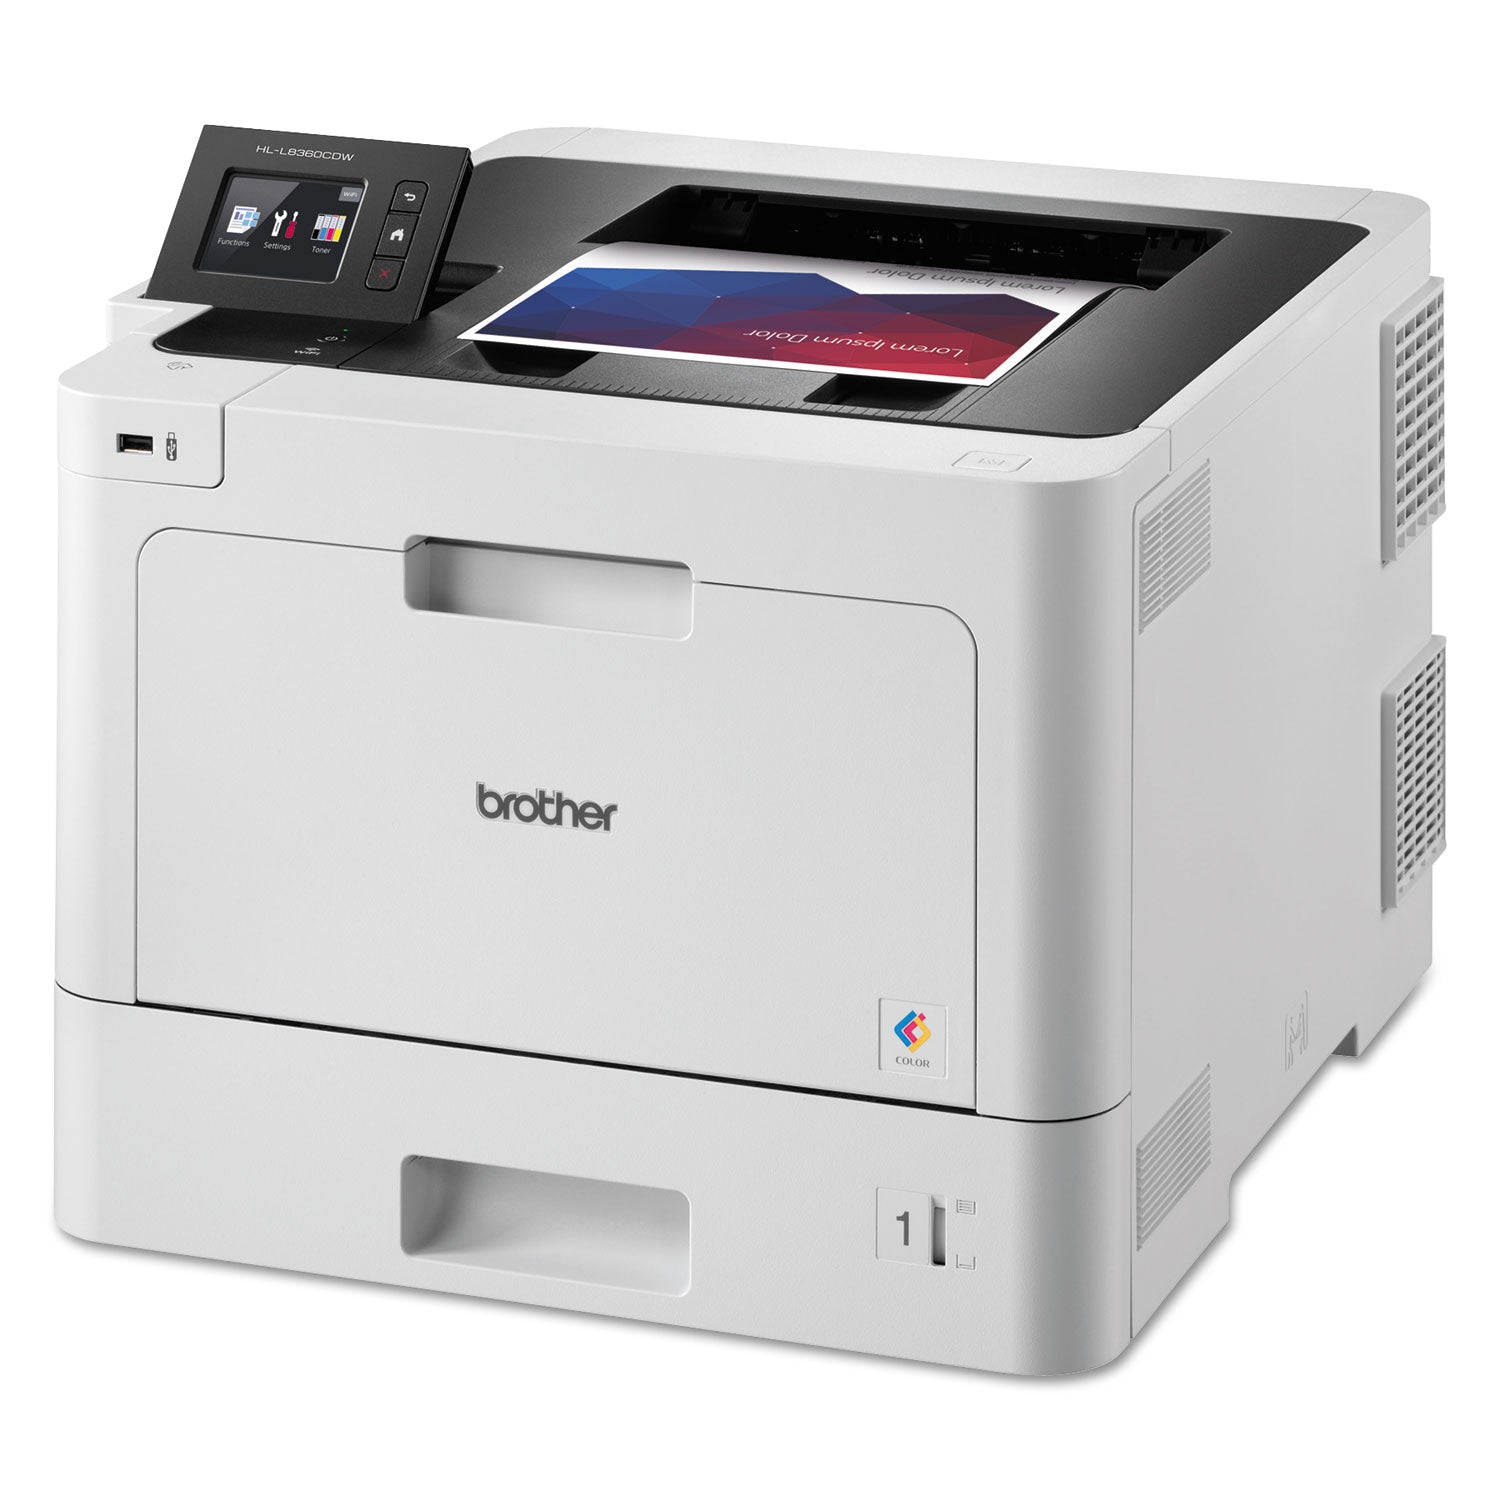 hll8360cdw-business-color-laser-printer-with-duplex-printing-and-wireless-networking_brthll8360cdw - 2